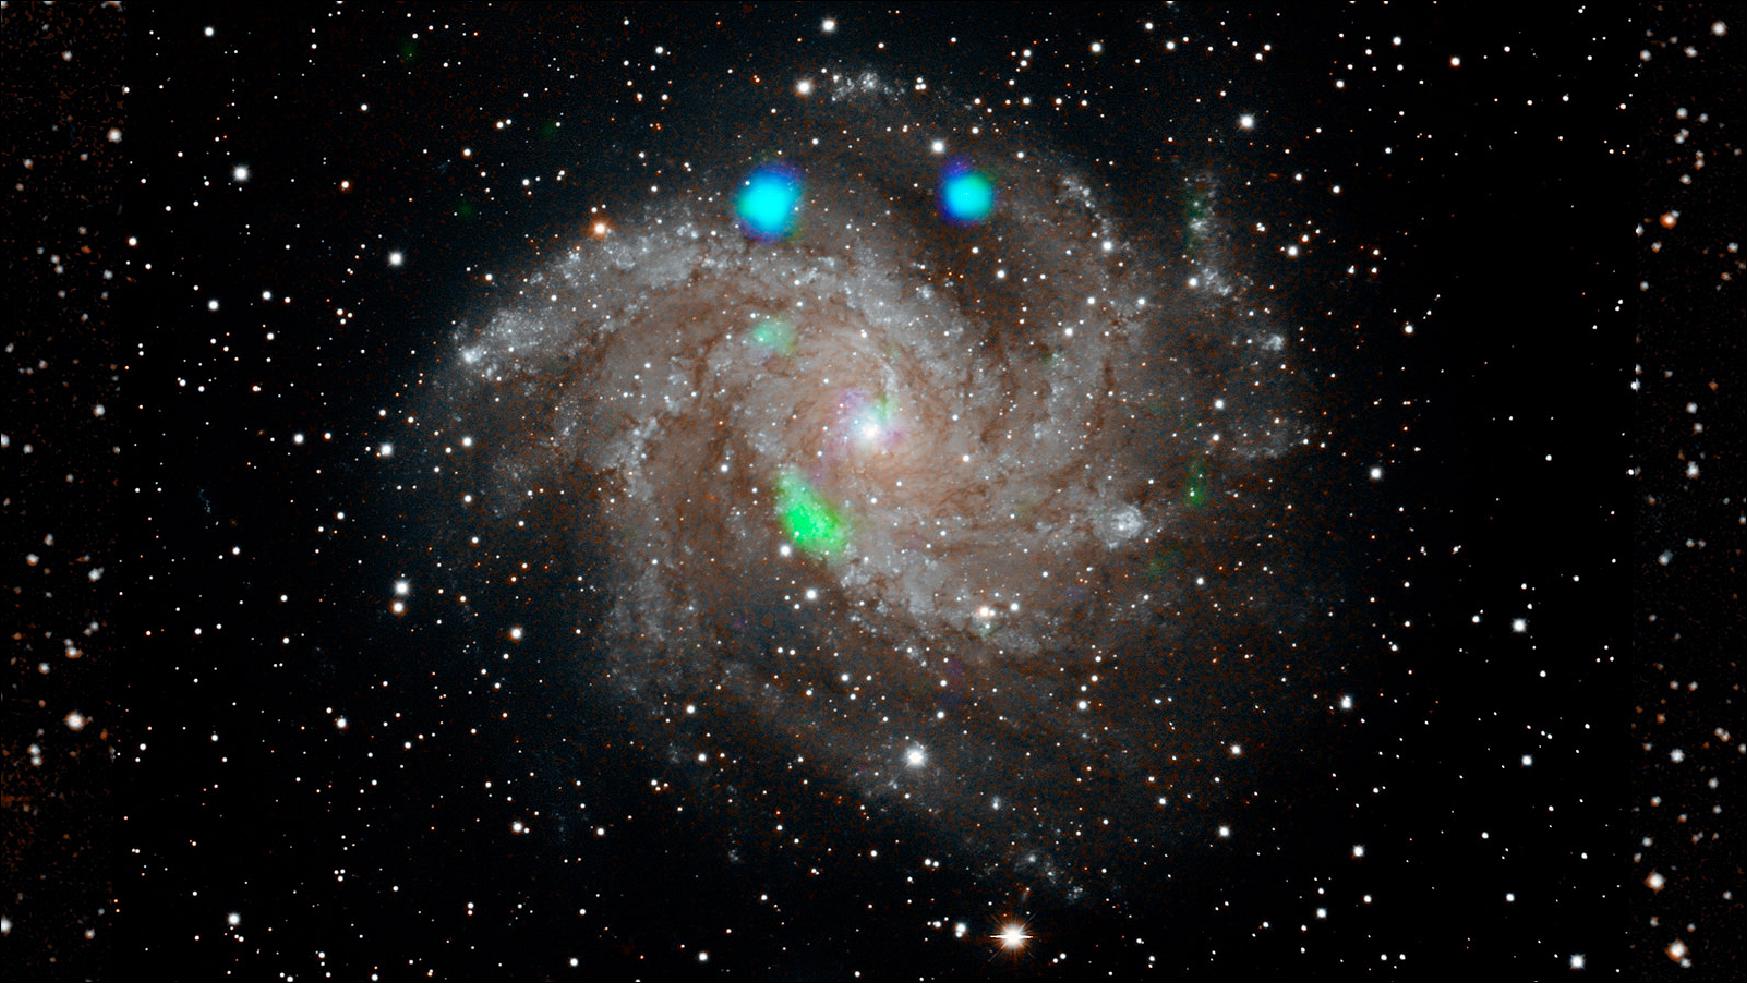 Figure 21: This visible-light image of the Fireworks galaxy (NGC 6946) comes from the Digital Sky Survey, and is overlaid with data from NASA's NuSTAR observatory (in blue and green), image credit: NASA/JPL-Caltech